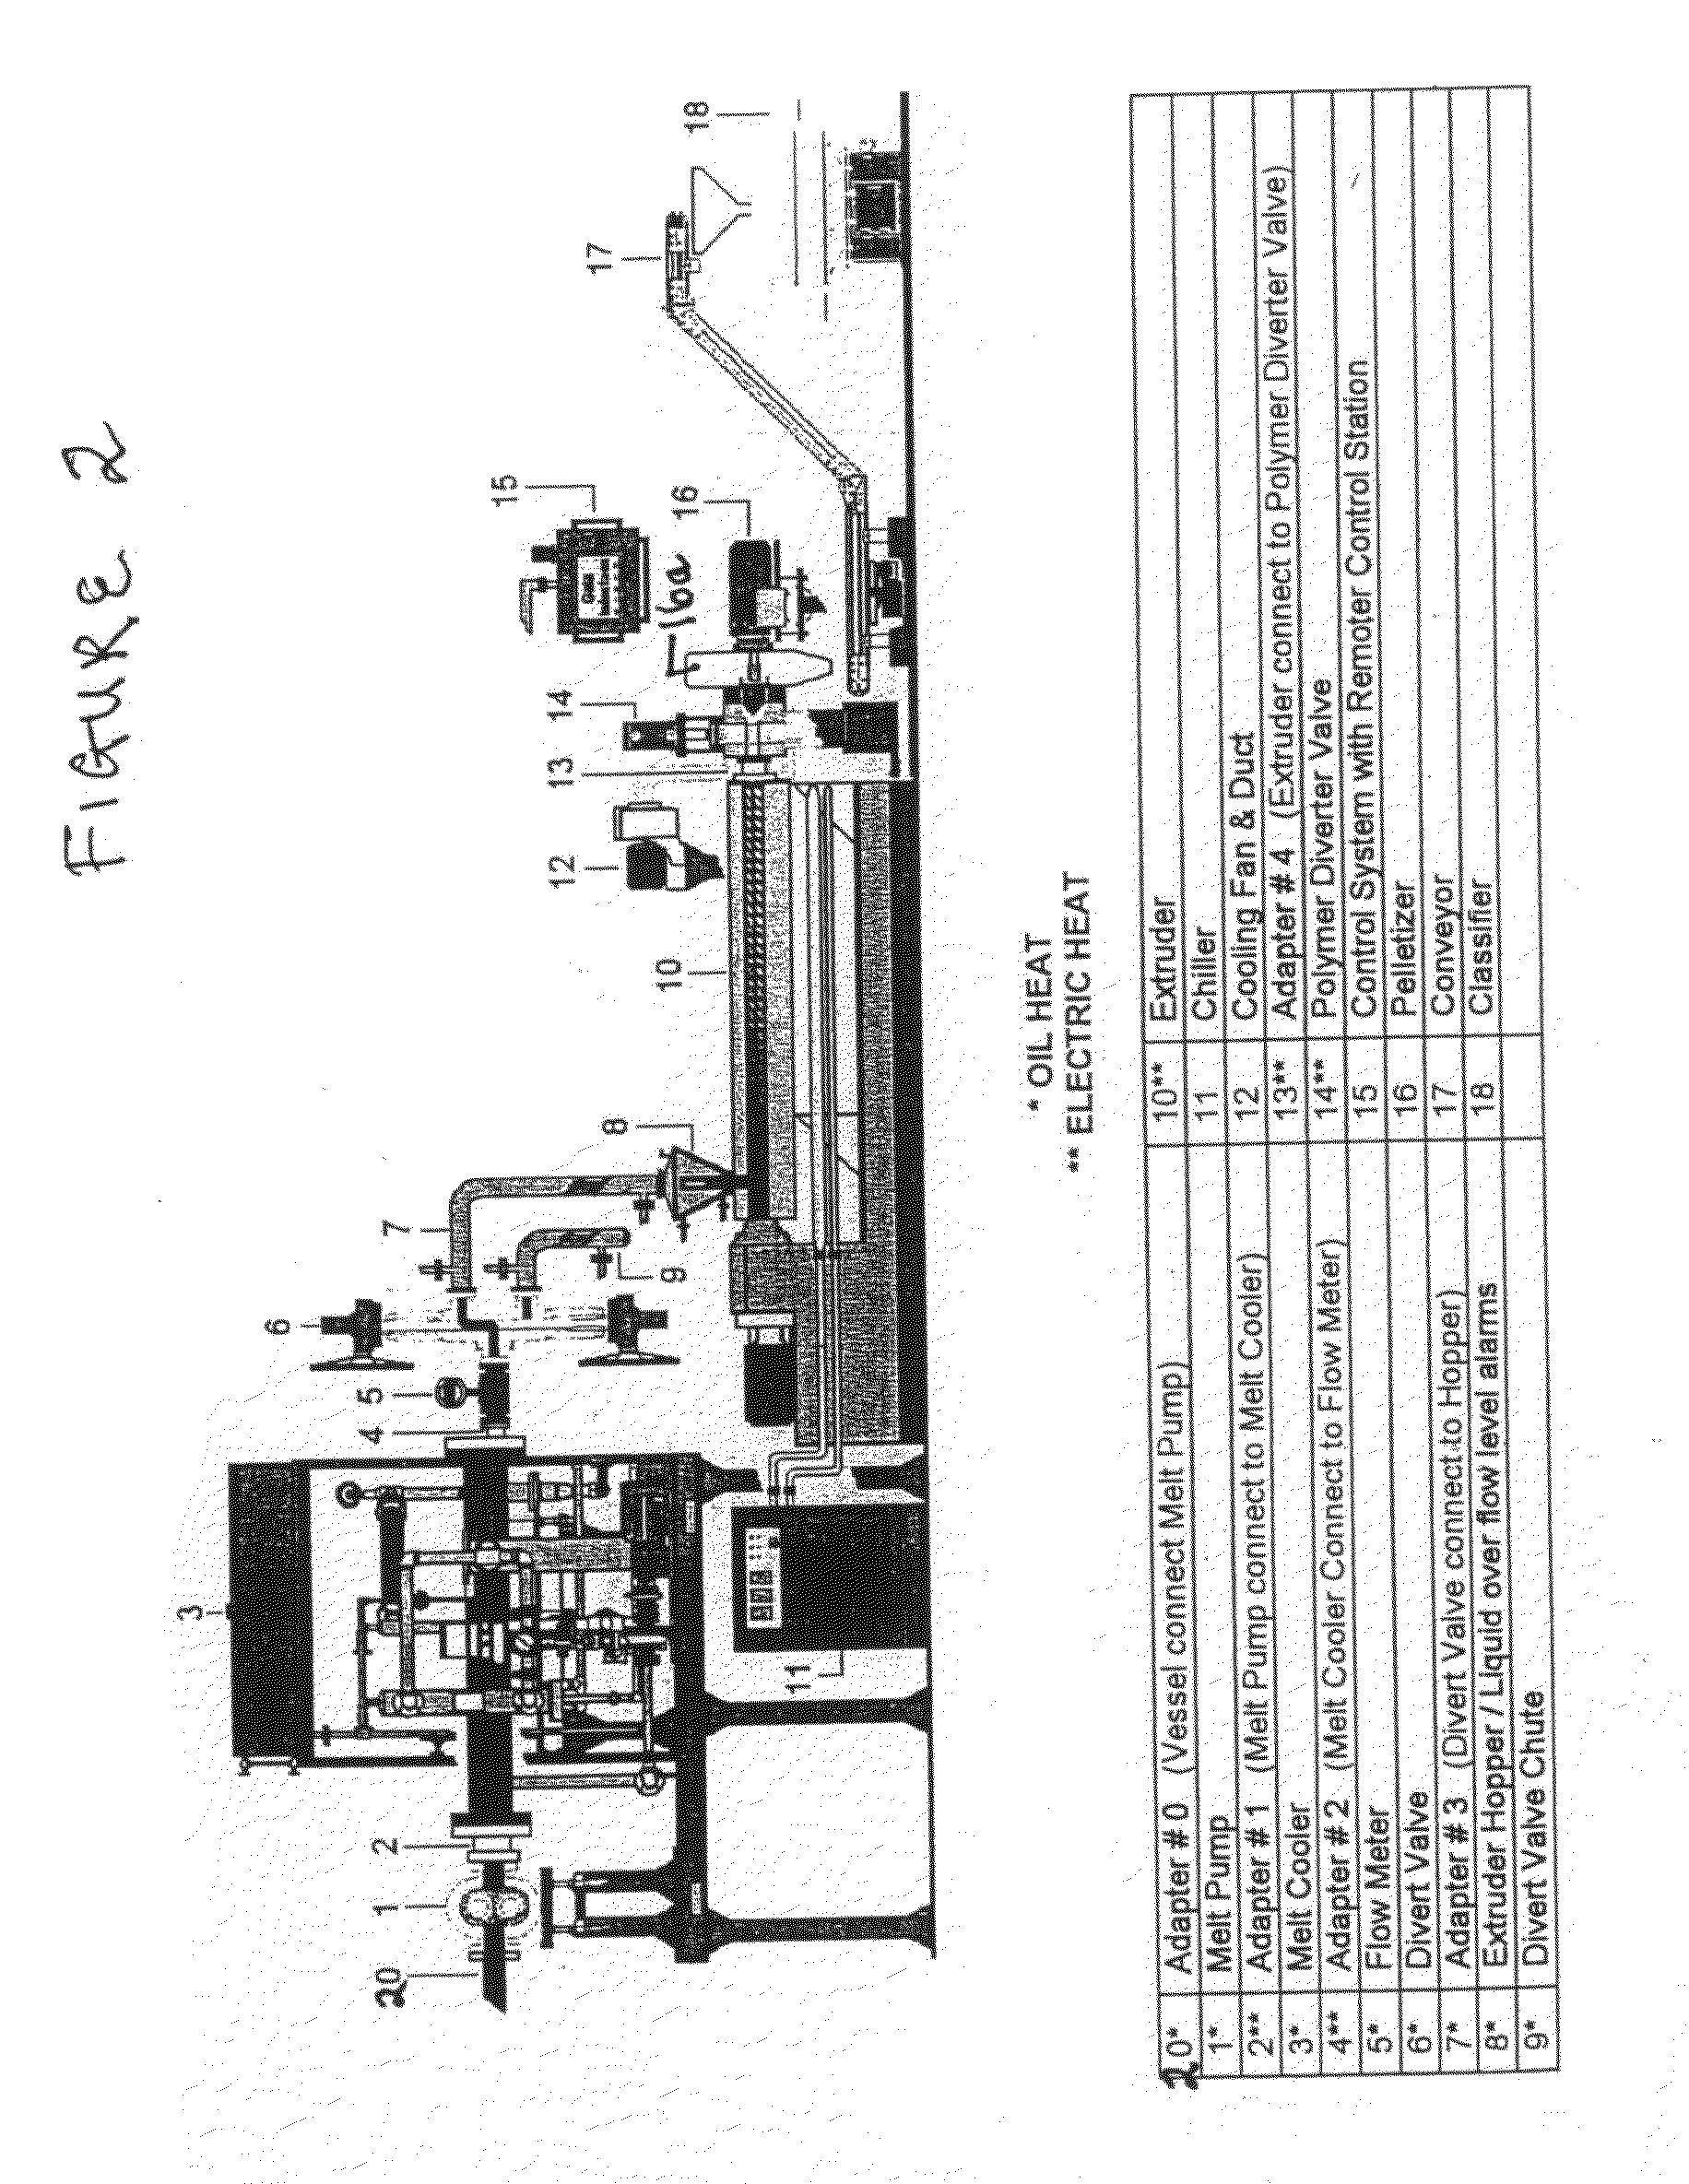 Apparatus and Method for Pelletizing Wax and Wax-Like Materials